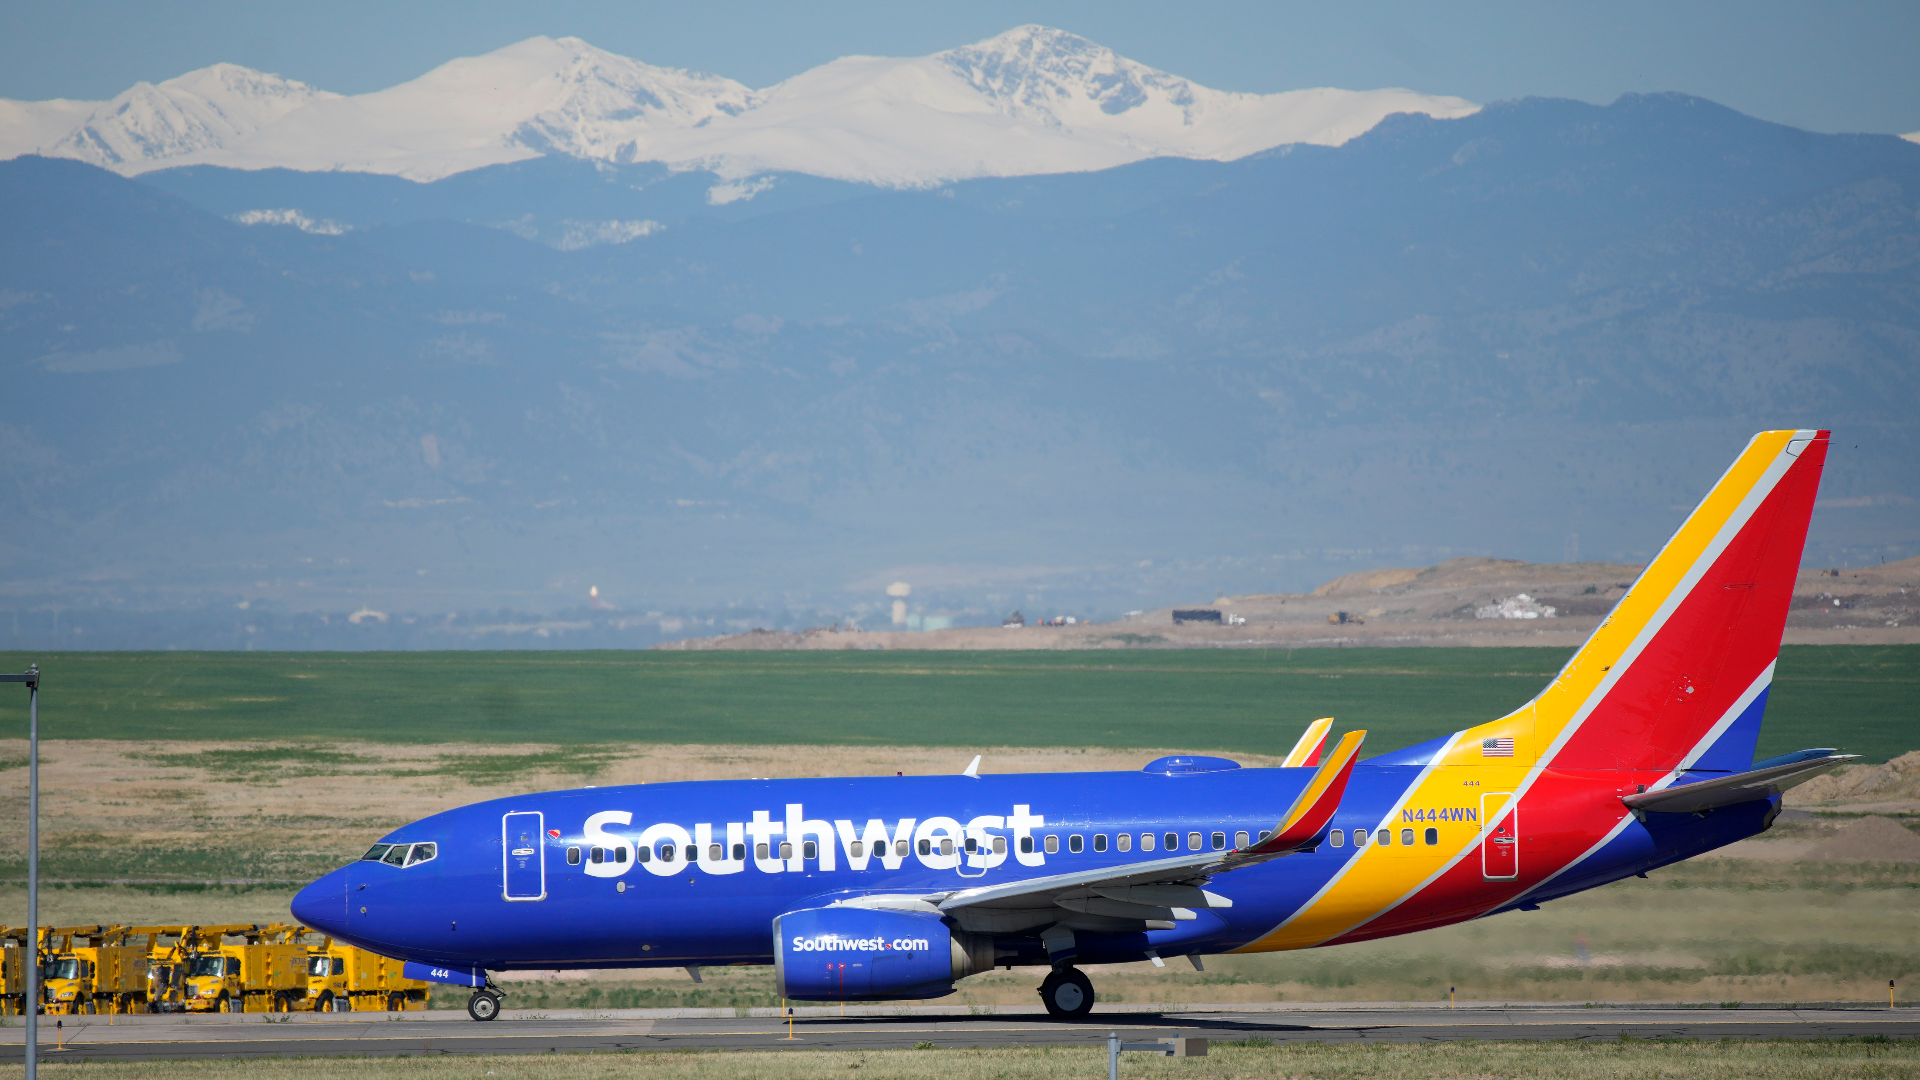 Need a vacation? Southwest offering 40% off fall flights made Thursday